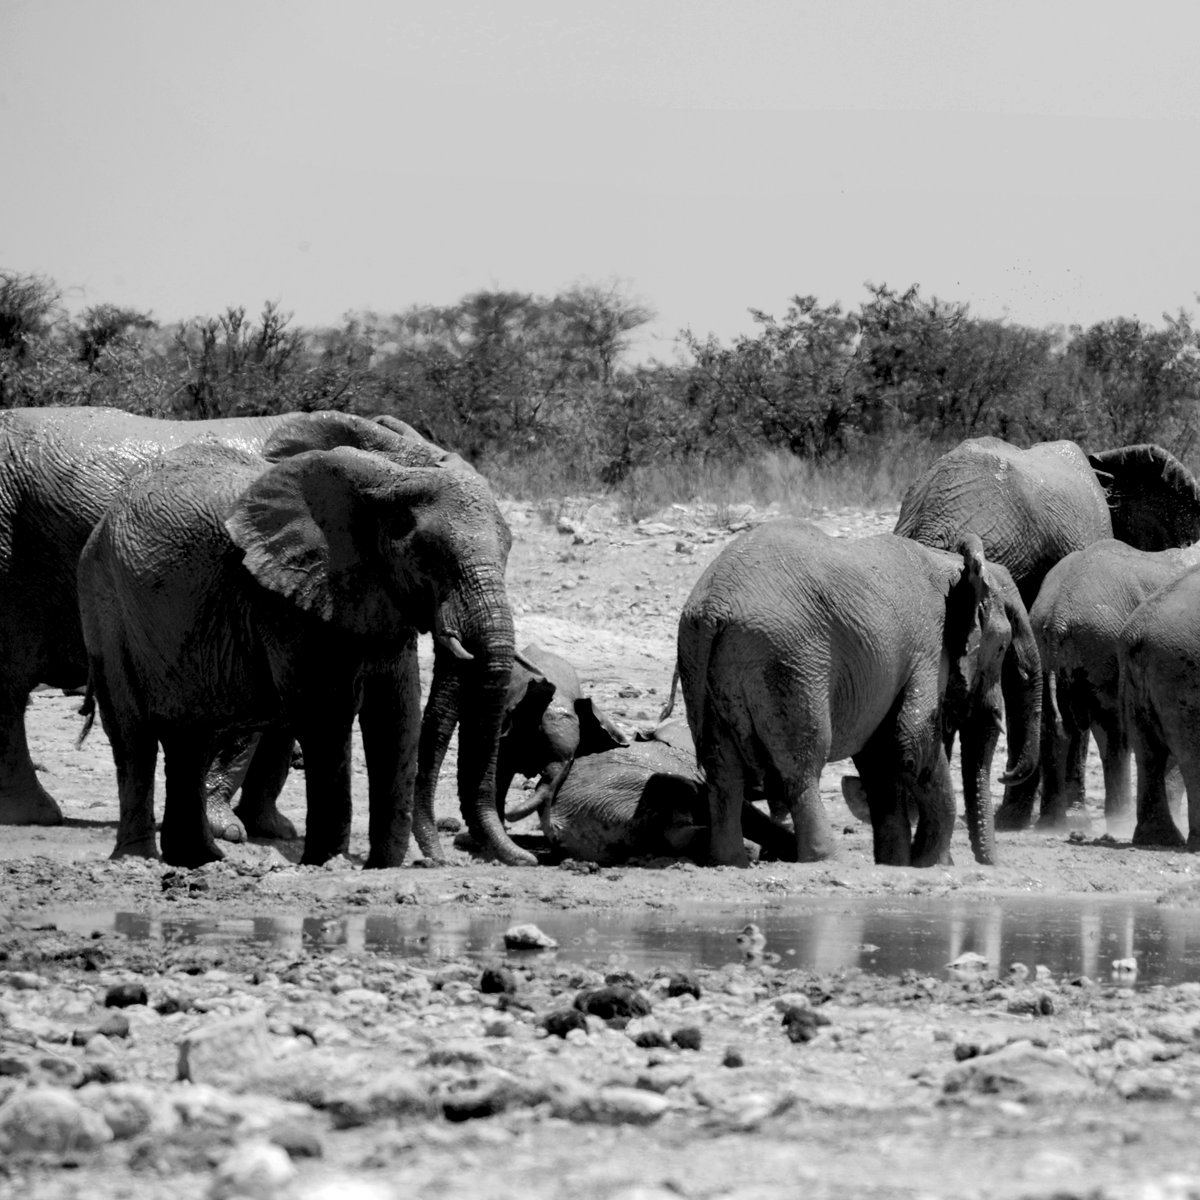 Elephants gathering at a water hole in the Etosha National Park, a breathtaking sight of immense power and serenity. Witnessing these majestic creatures quenching their thirst in their natural habitat is a true privilege. #EtoshaNationalPark #ElephantEncounters 🐘#namibia